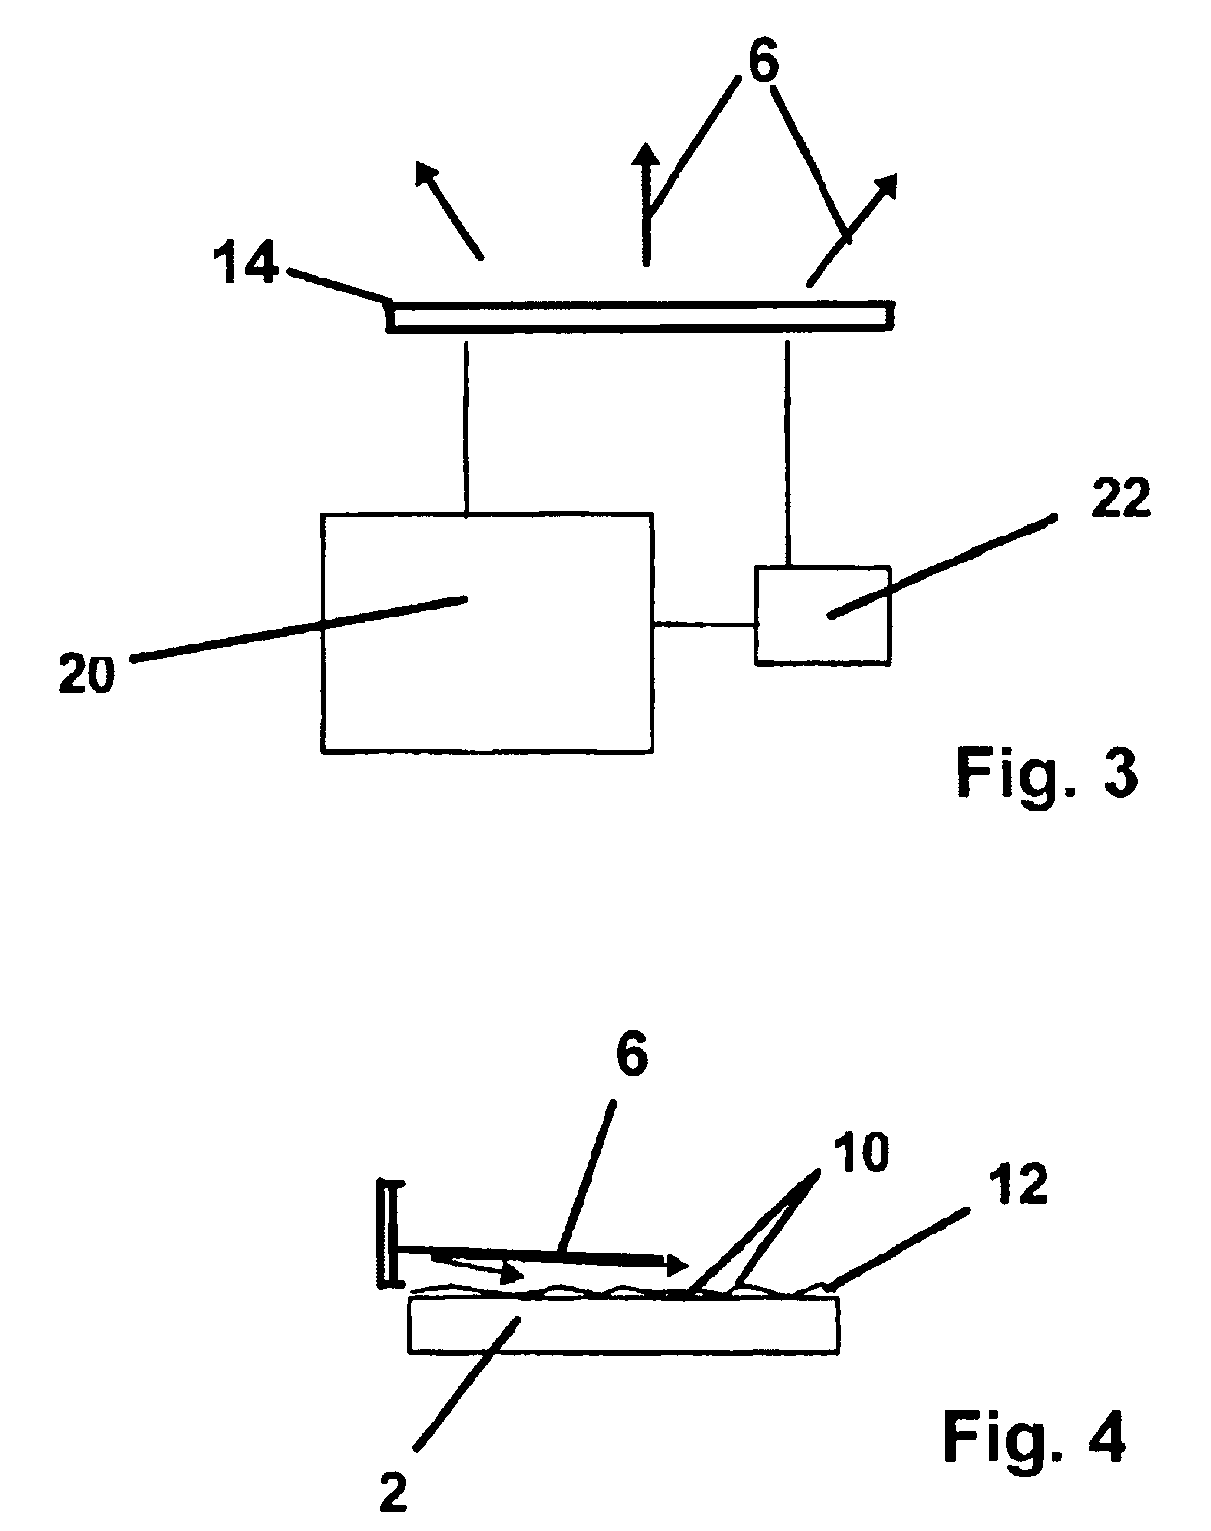 Apparatus for displaying an object having relief